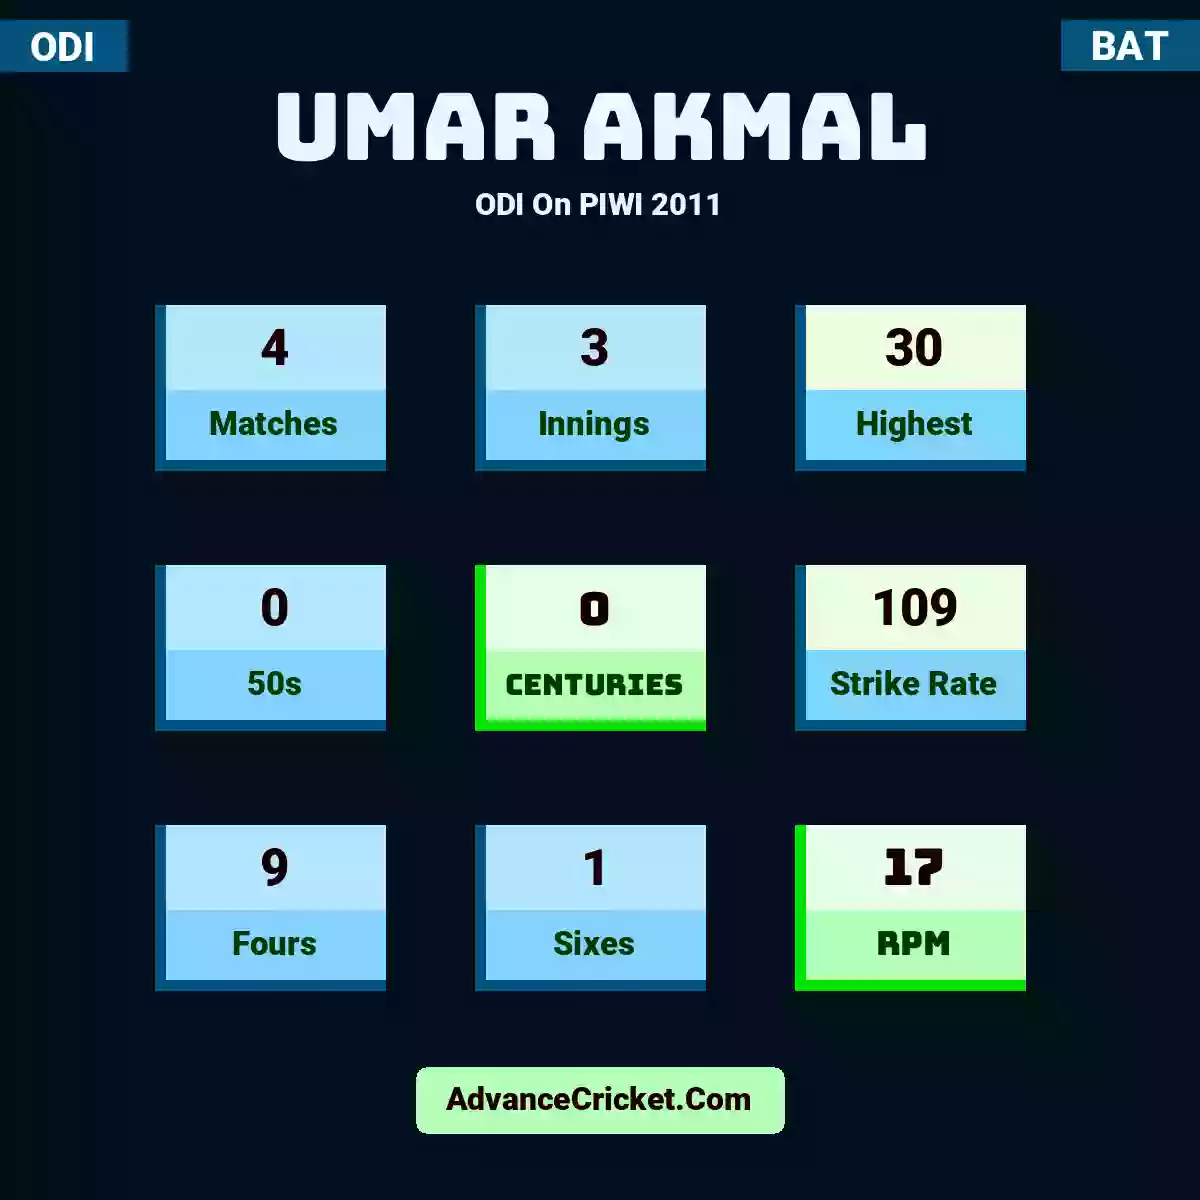 Umar Akmal ODI  On PIWI 2011, Umar Akmal played 4 matches, scored 30 runs as highest, 0 half-centuries, and 0 centuries, with a strike rate of 109. U.Akmal hit 9 fours and 1 sixes, with an RPM of 17.